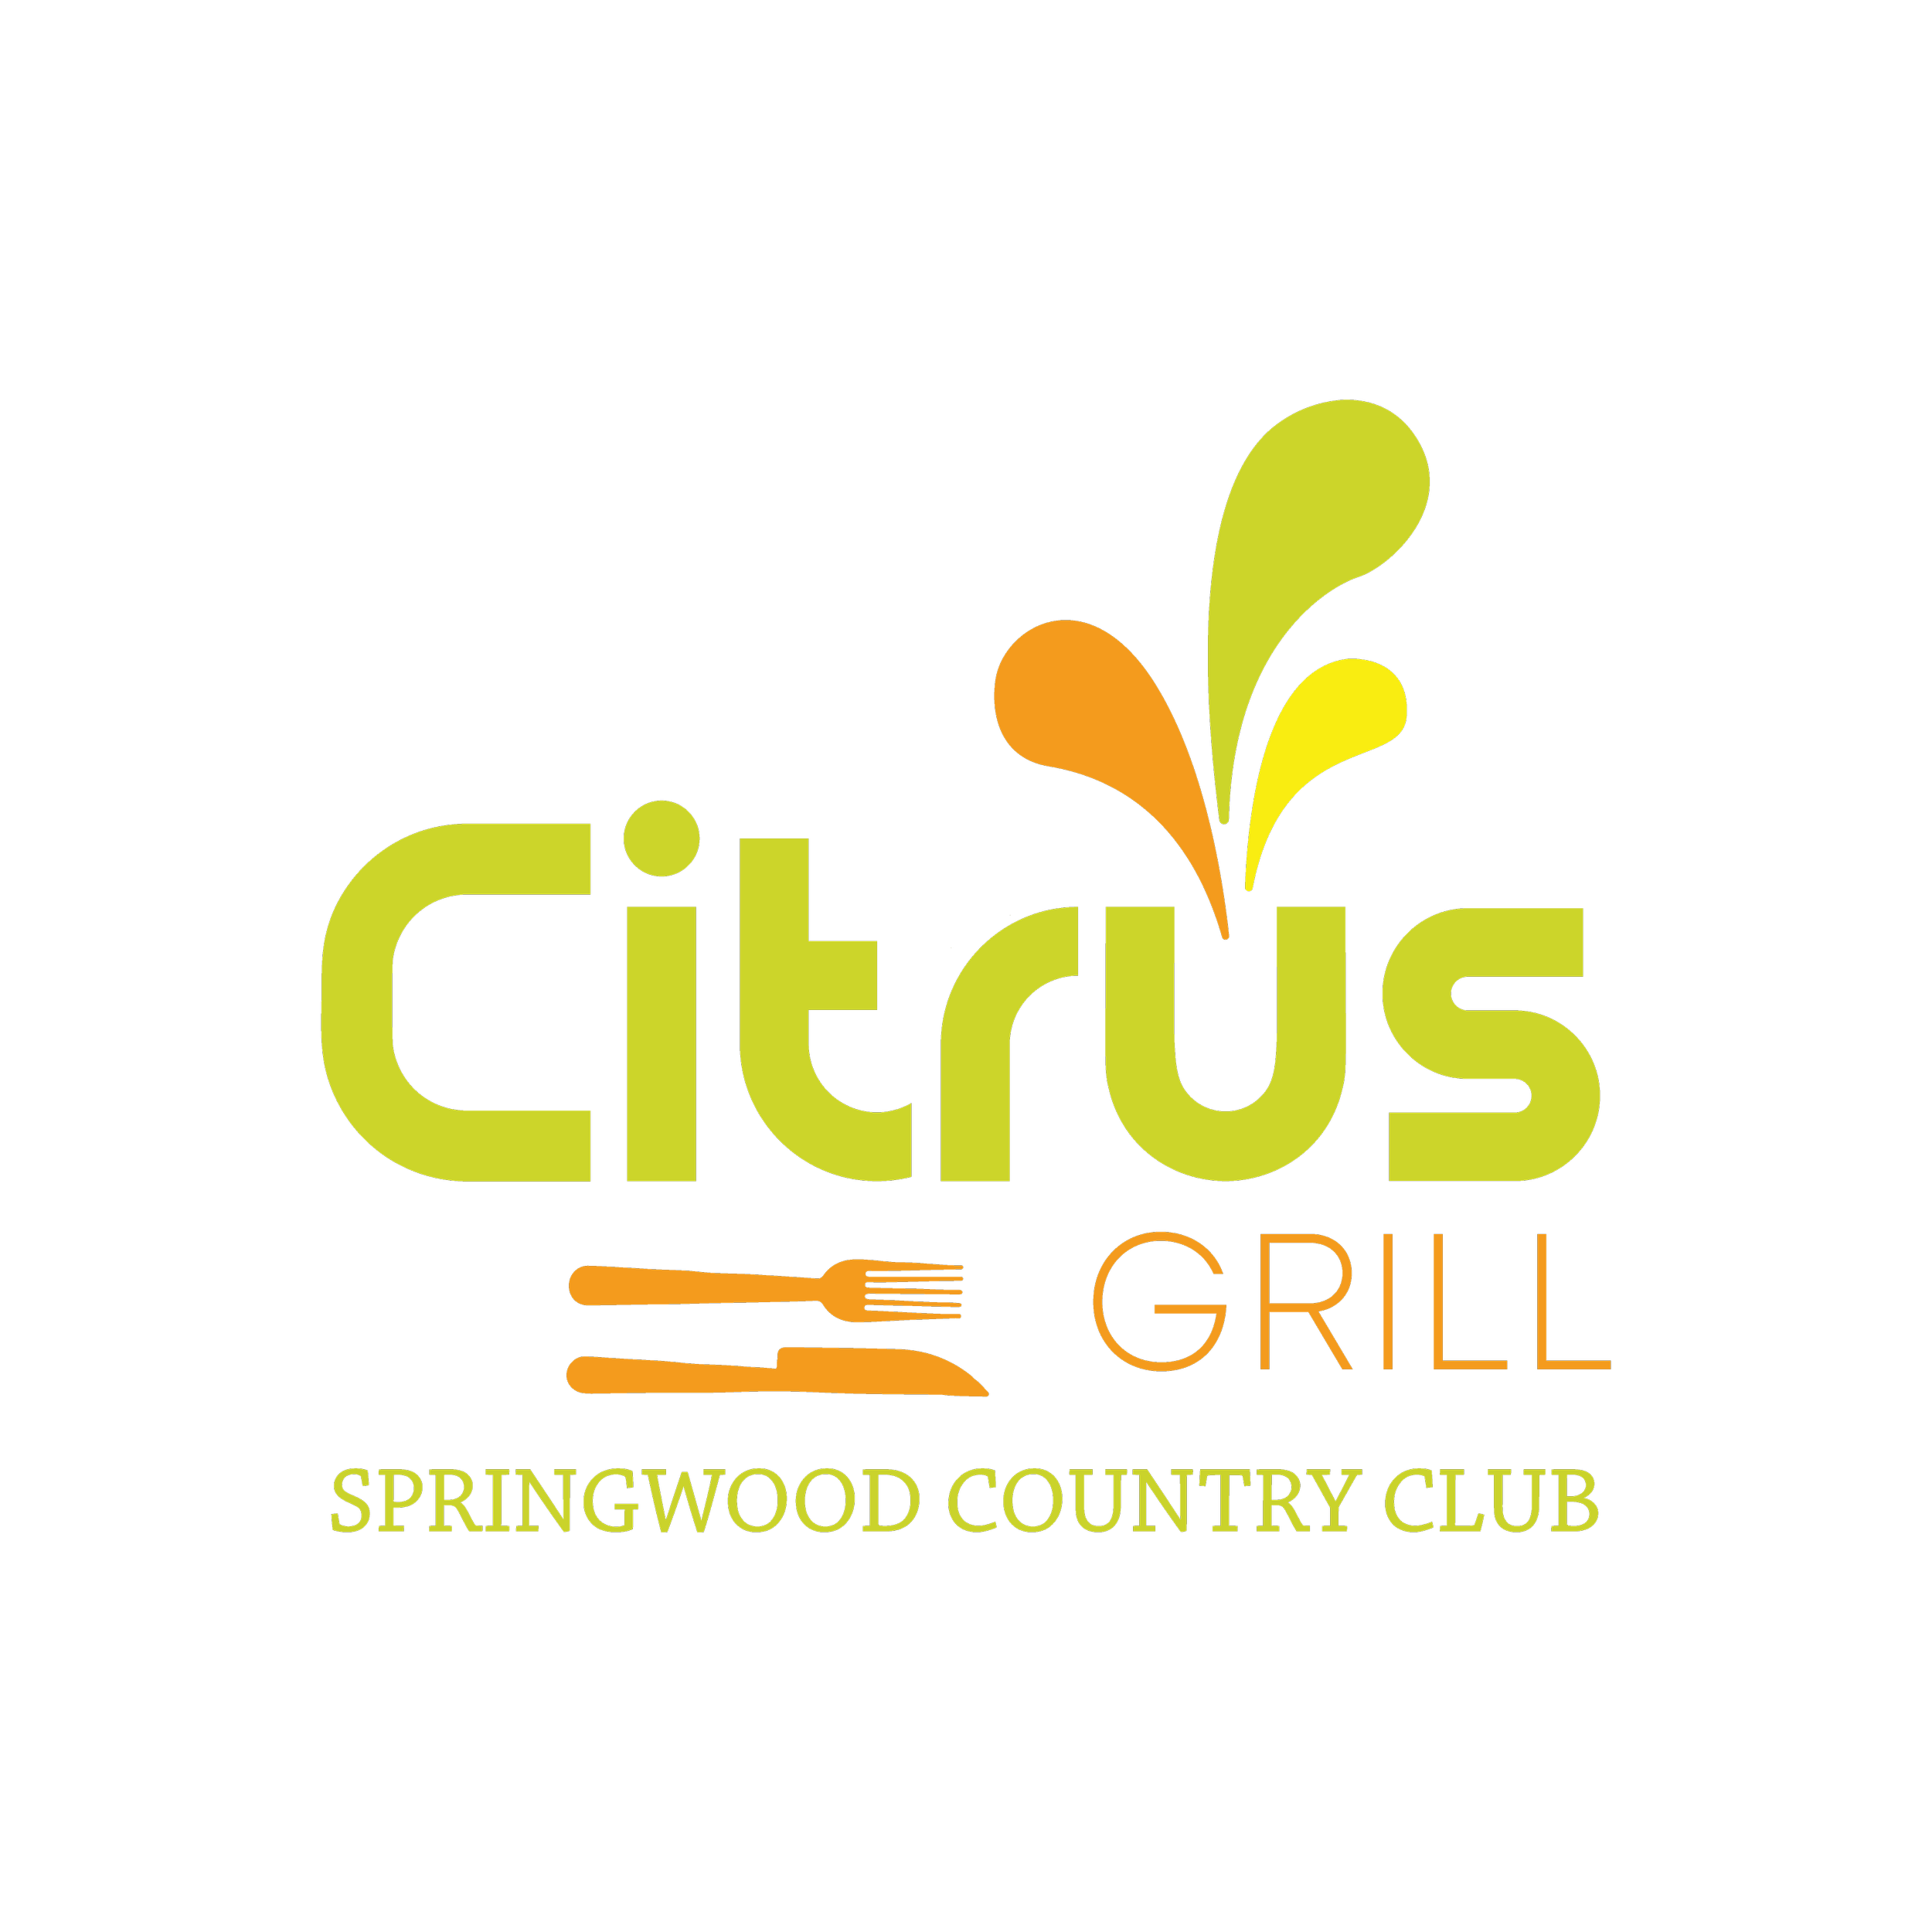 Citrus Grill on black Logo-PNG.png